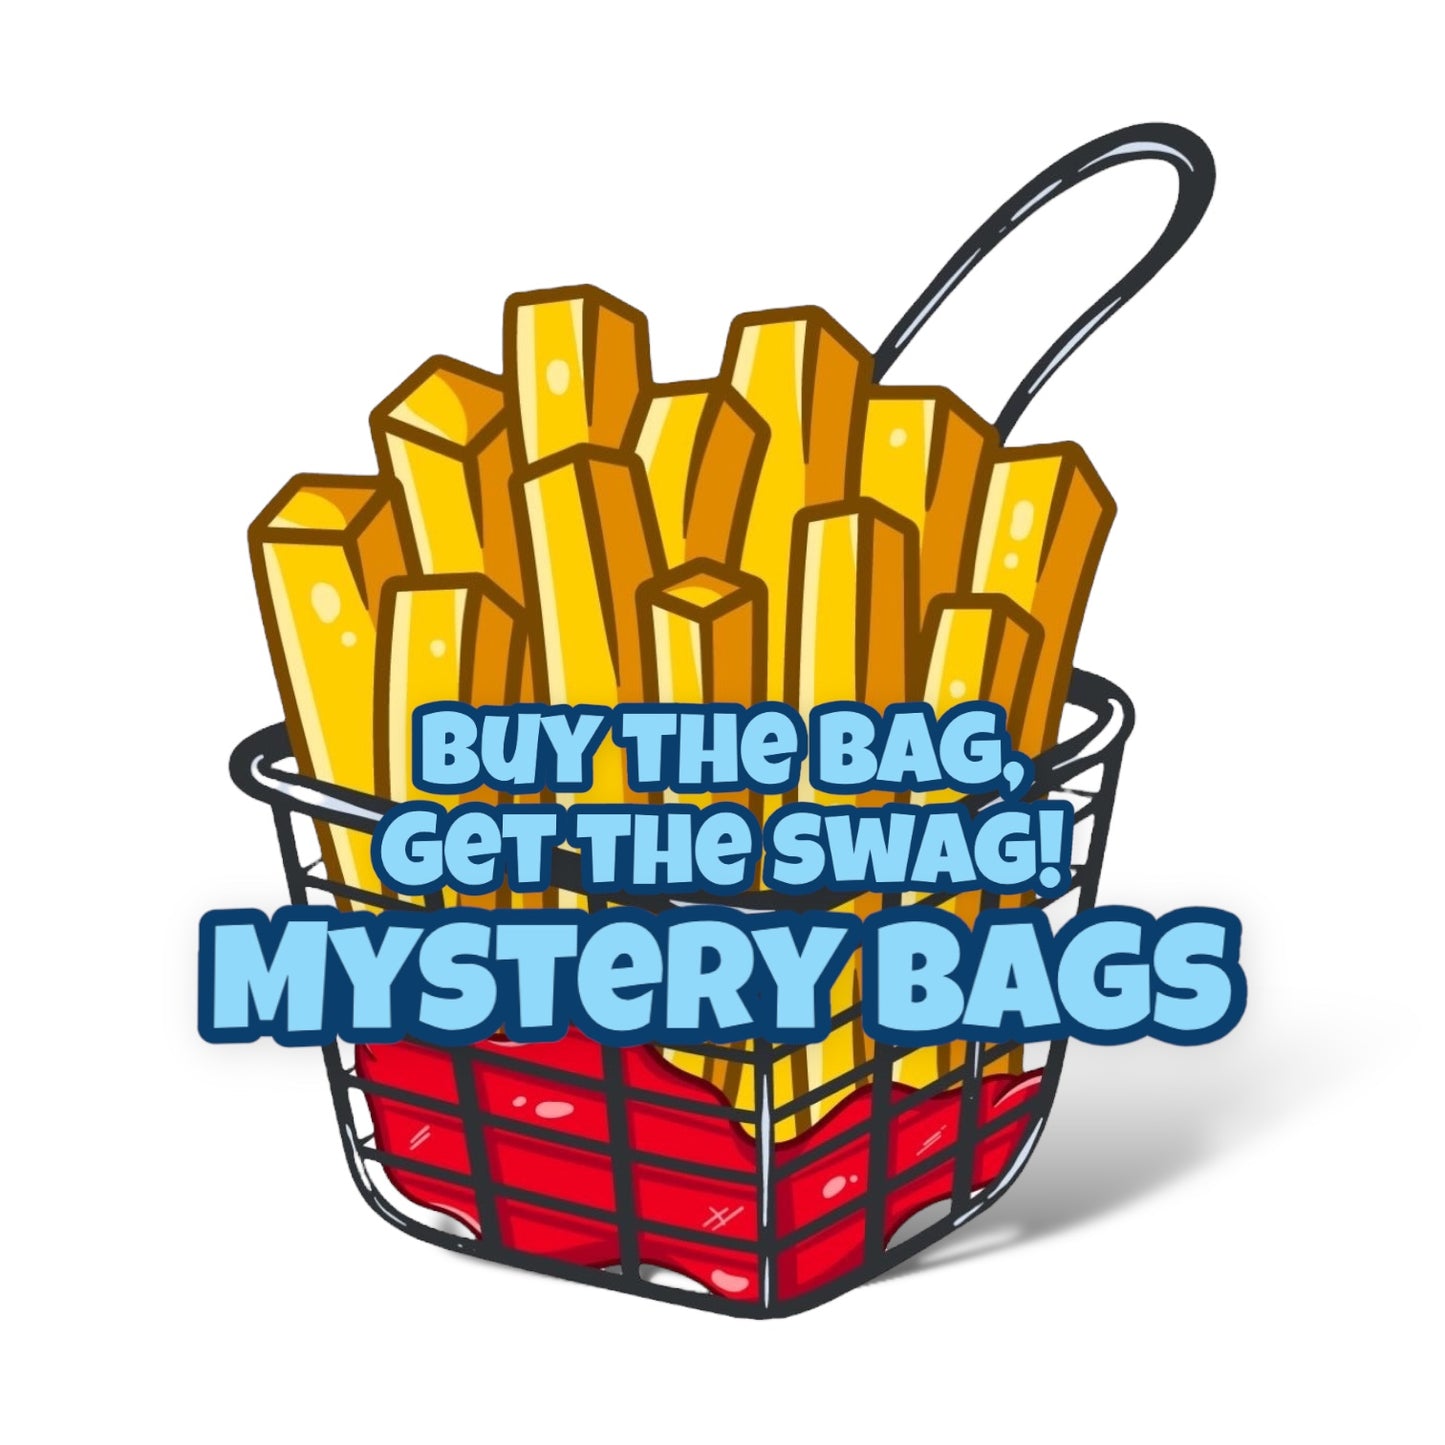 FryGuy's "Buy The Bag, Get The Swag" Mystery Bags